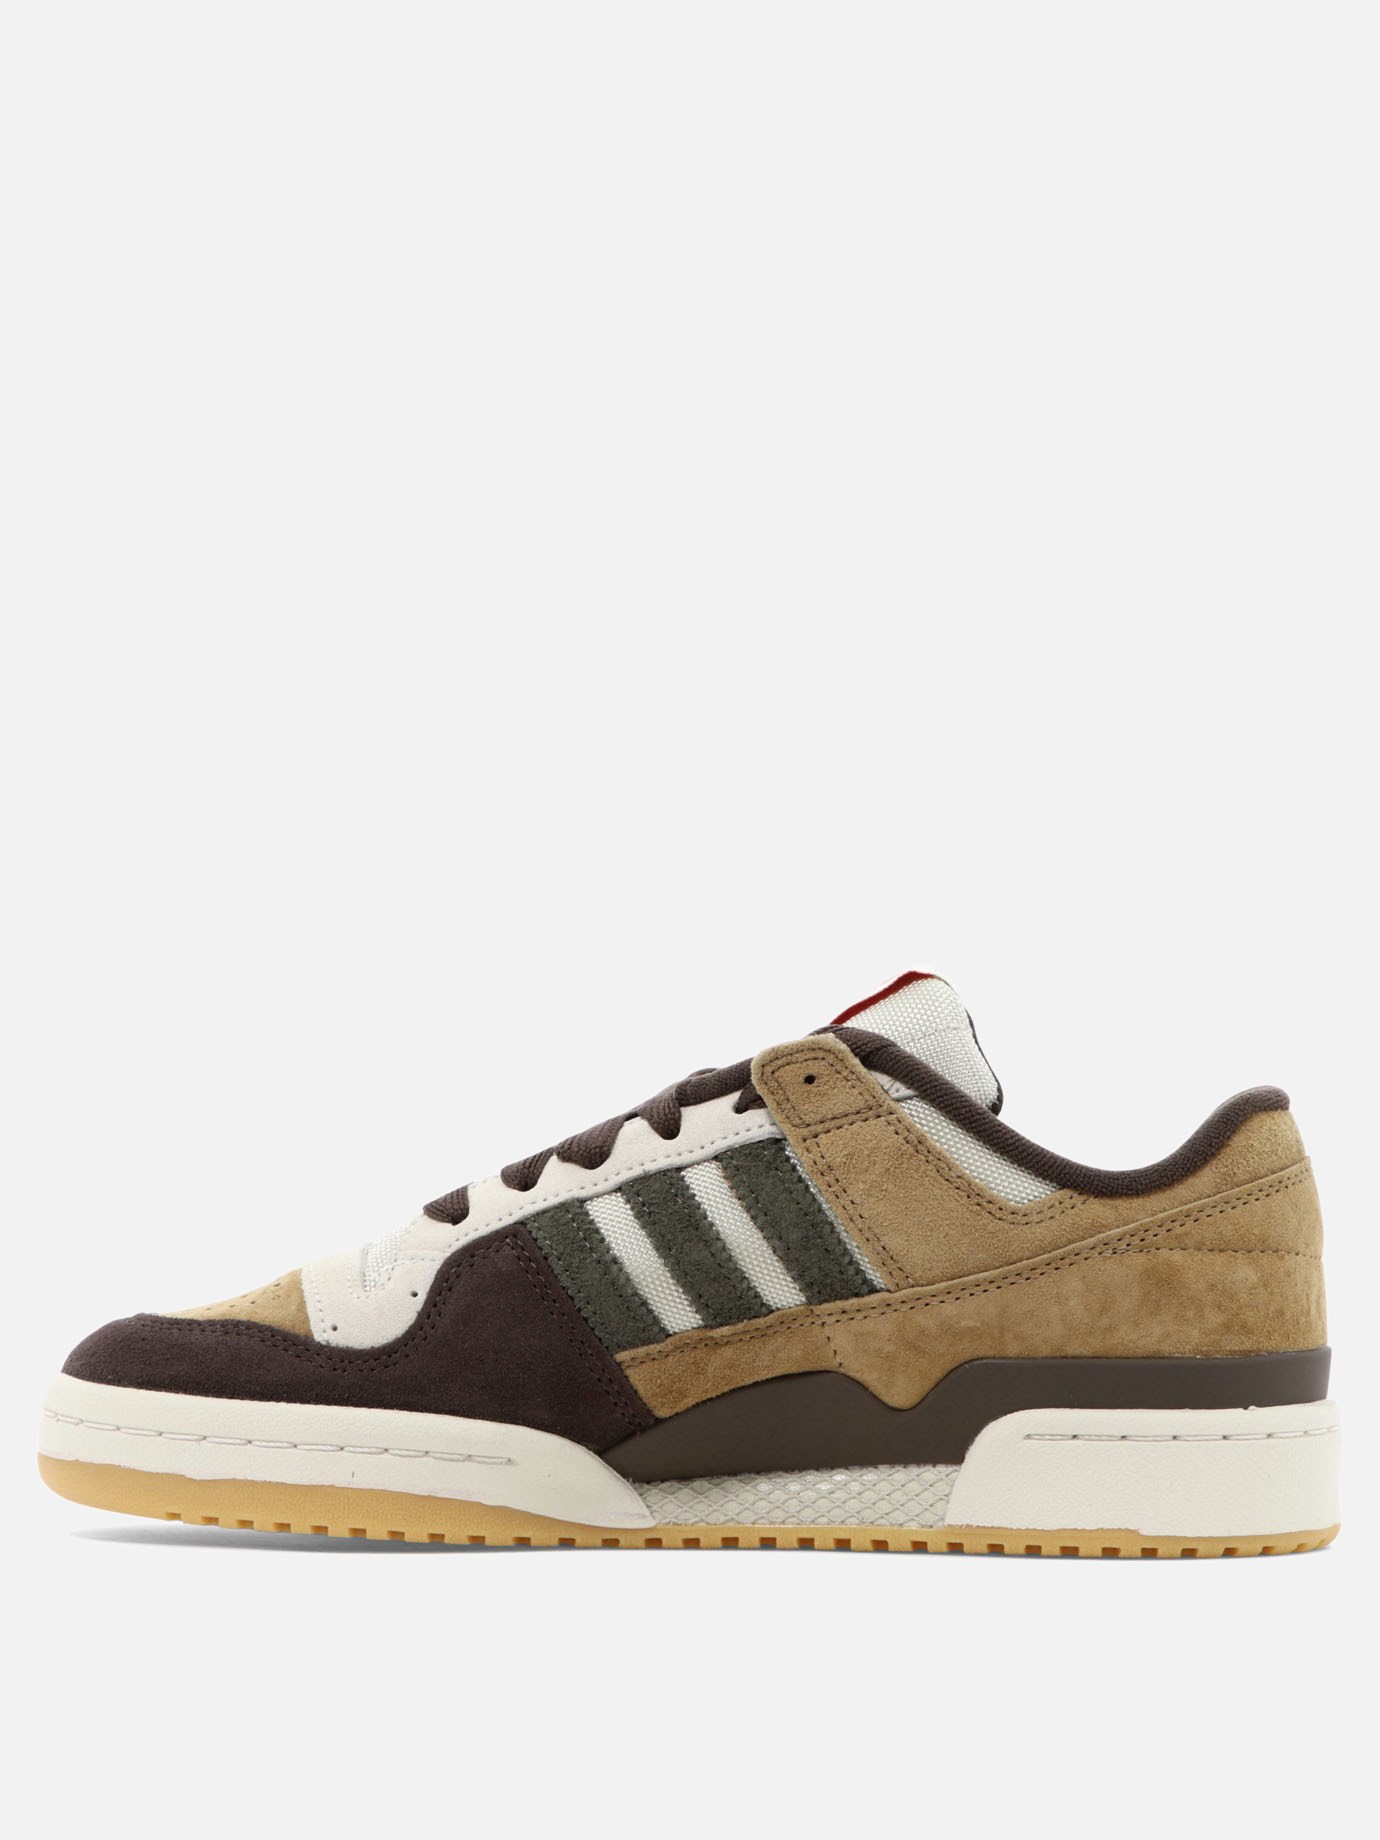 Sneaker  Forum 84 Low CL  by Adidas